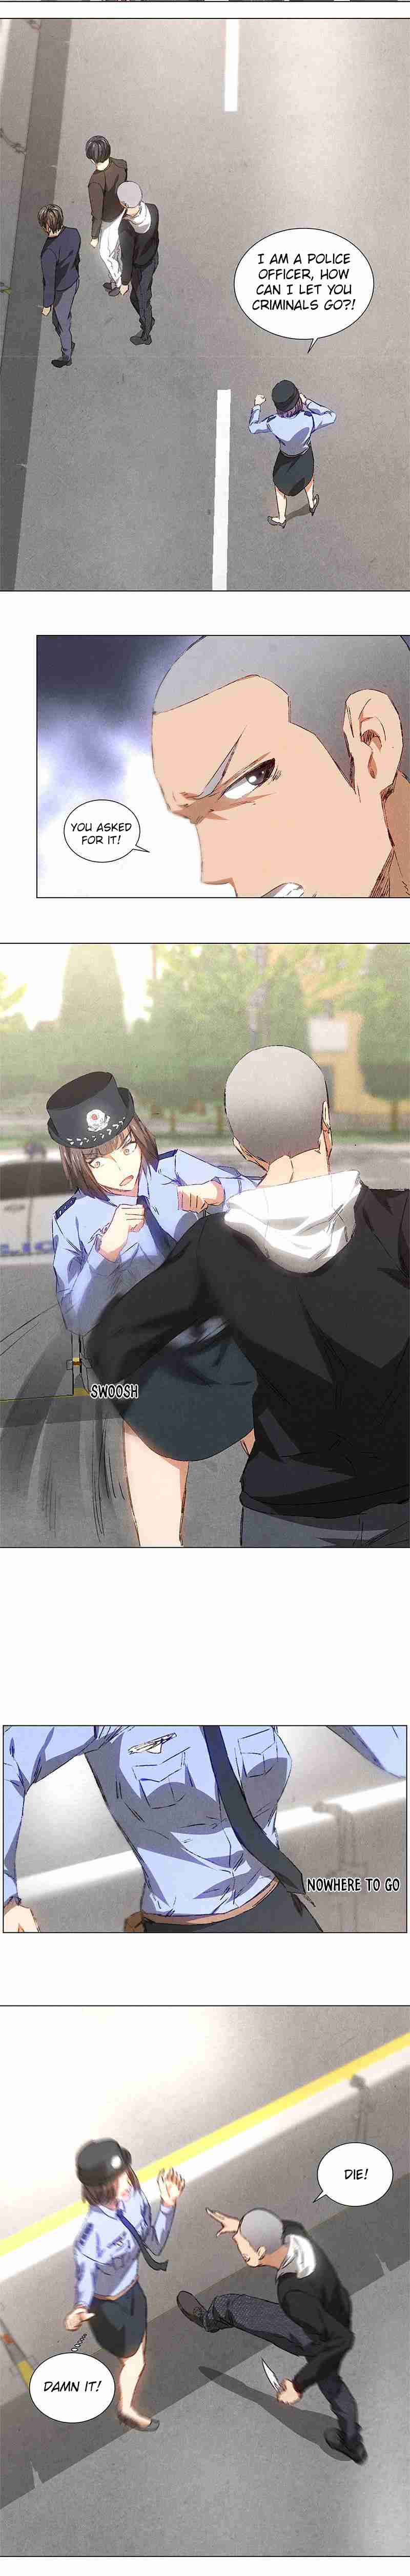 I Was Trash Vol. 1 Ch. 32 Attacking a Police Officer